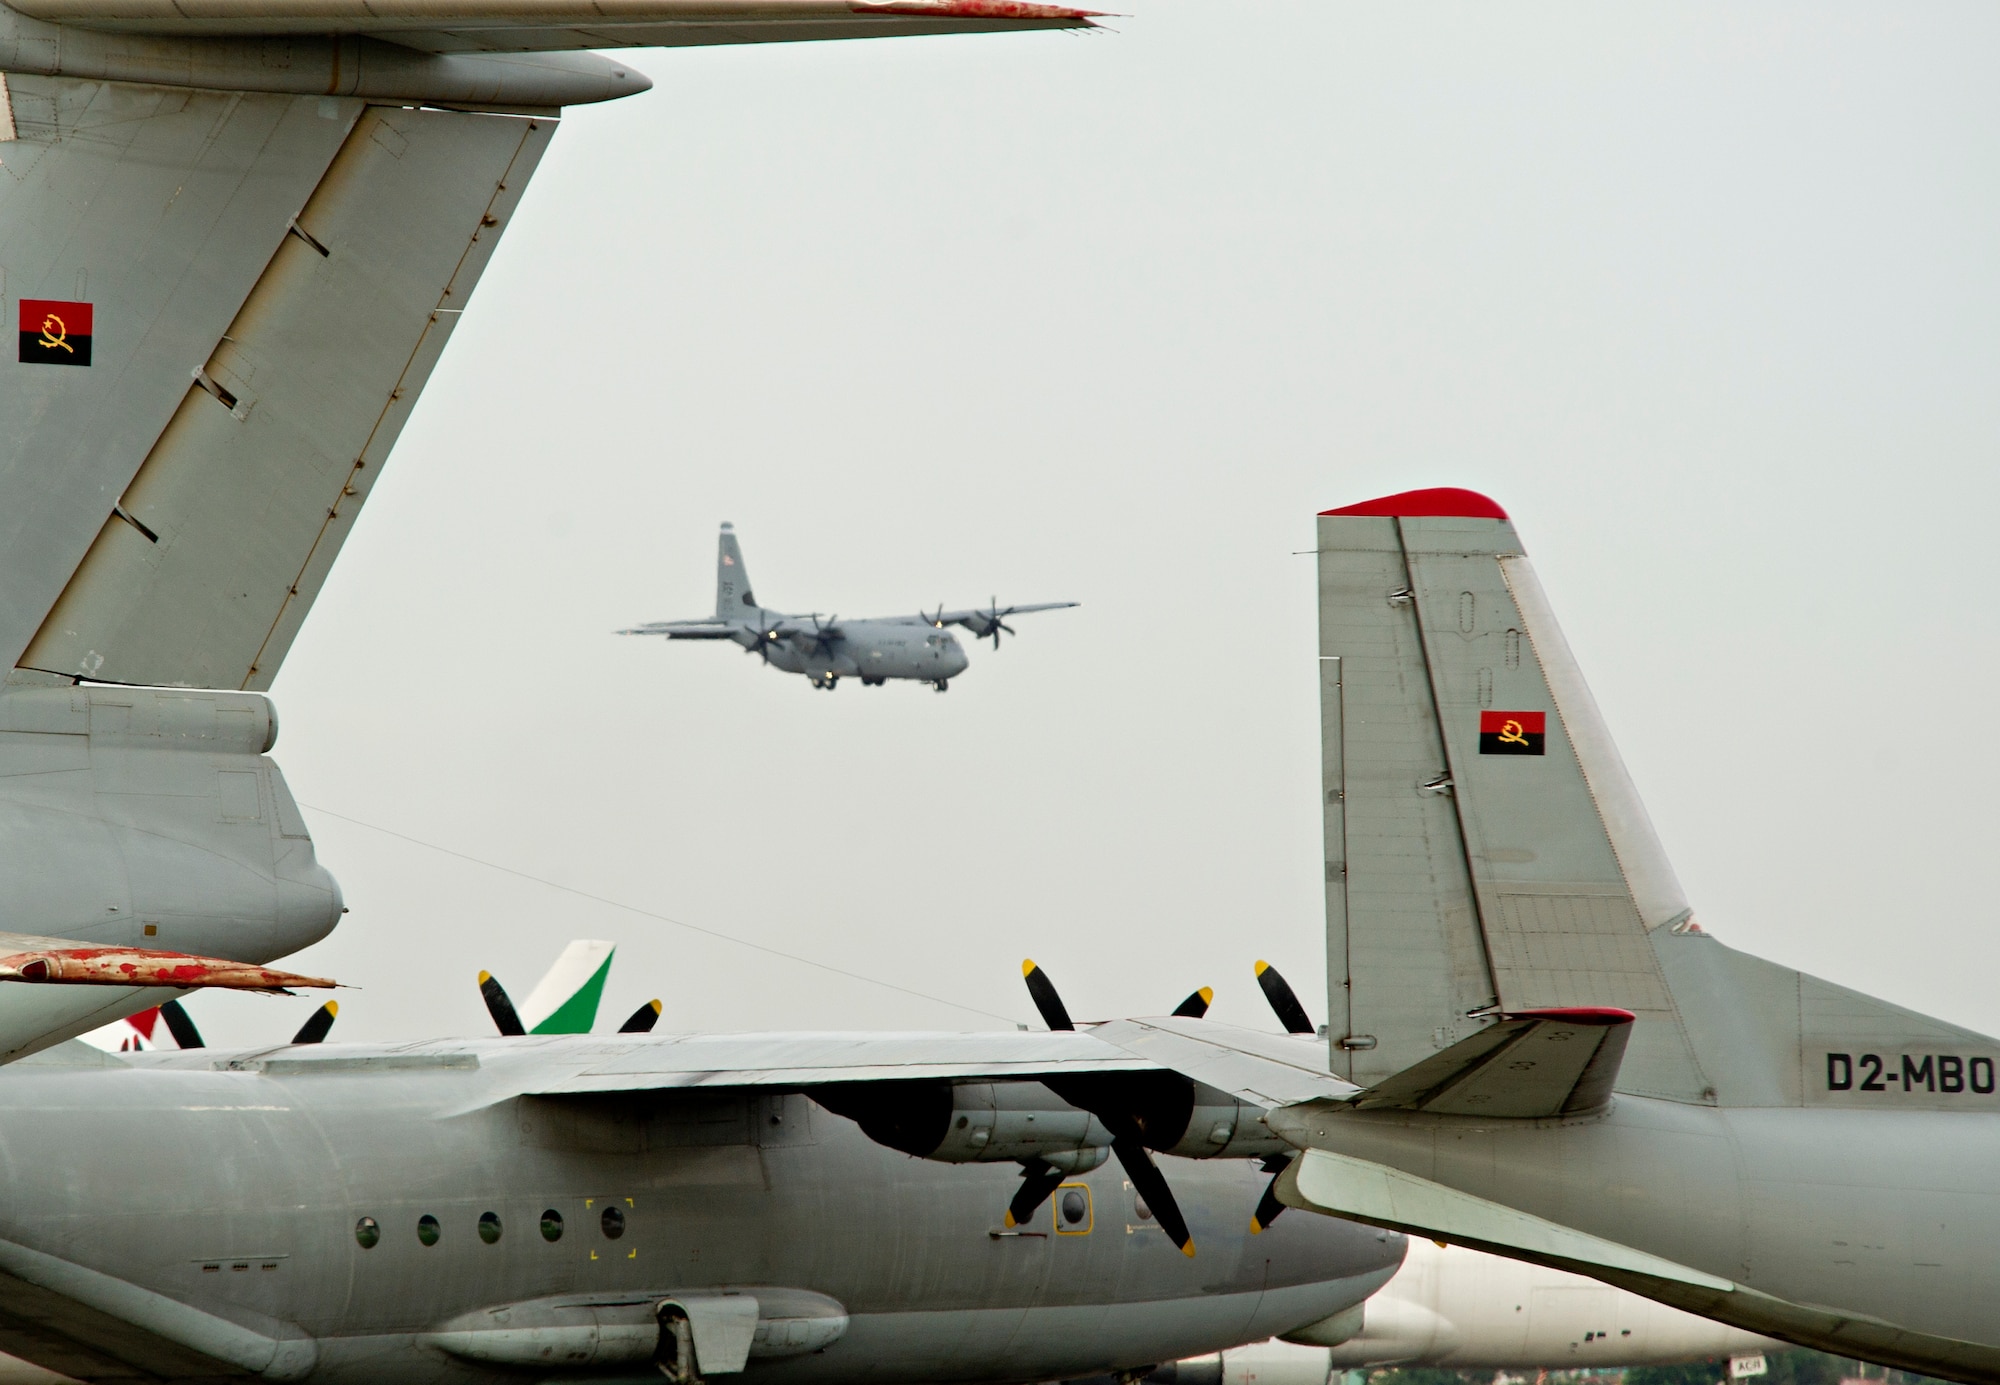 A C-130J Super Hercules from the 37th Airlift Squadron lands at Luanda Air Base, Angola, March 22, 2014. The C-130J and about 20 U.S. Air Force airmen are in Angola to participate in African Partnership Flight with the Angolan and Zambian air forces, an event which provides a collaborative learning environment for the airmen. (U.S. Air Force photo/Tech. Sgt. Benjamin Wilson)